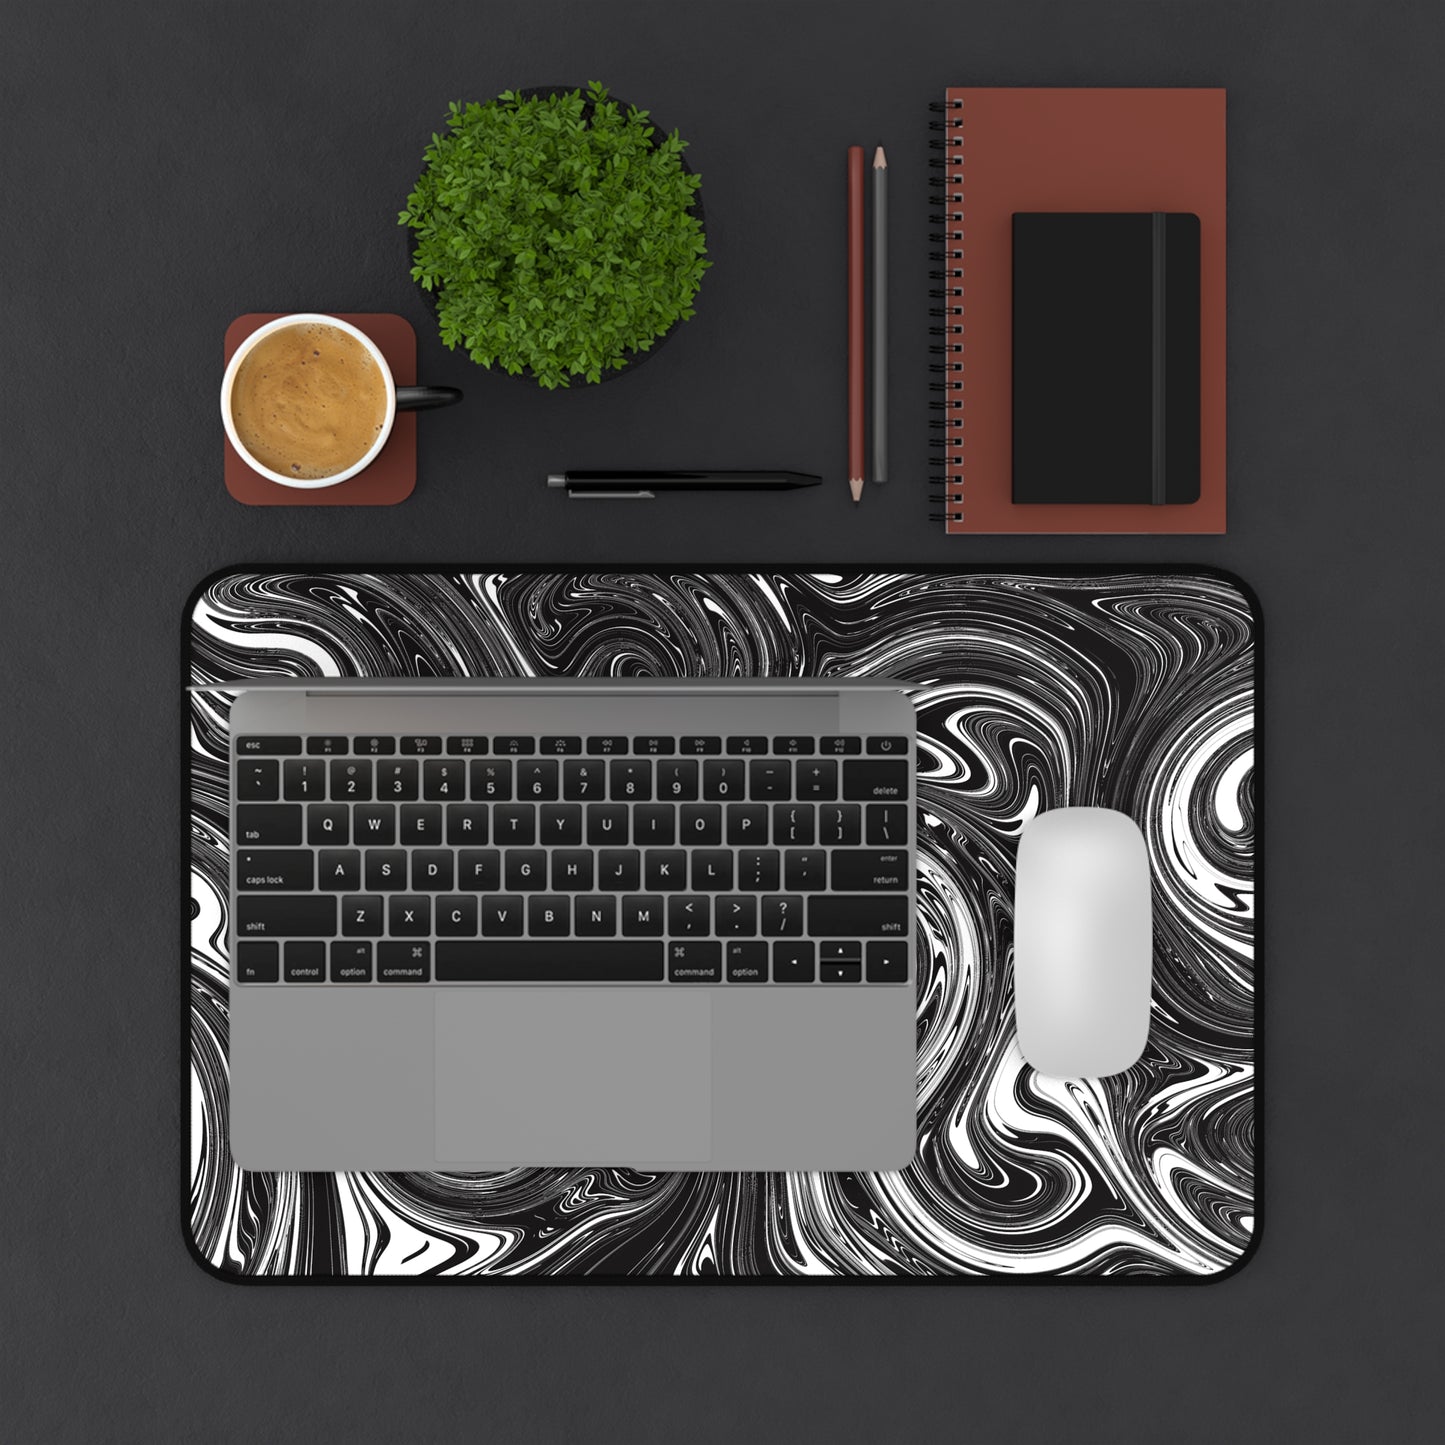 A 12" x 18" desk mat with black and white swirls. A laptop and mouse sit on top of it.